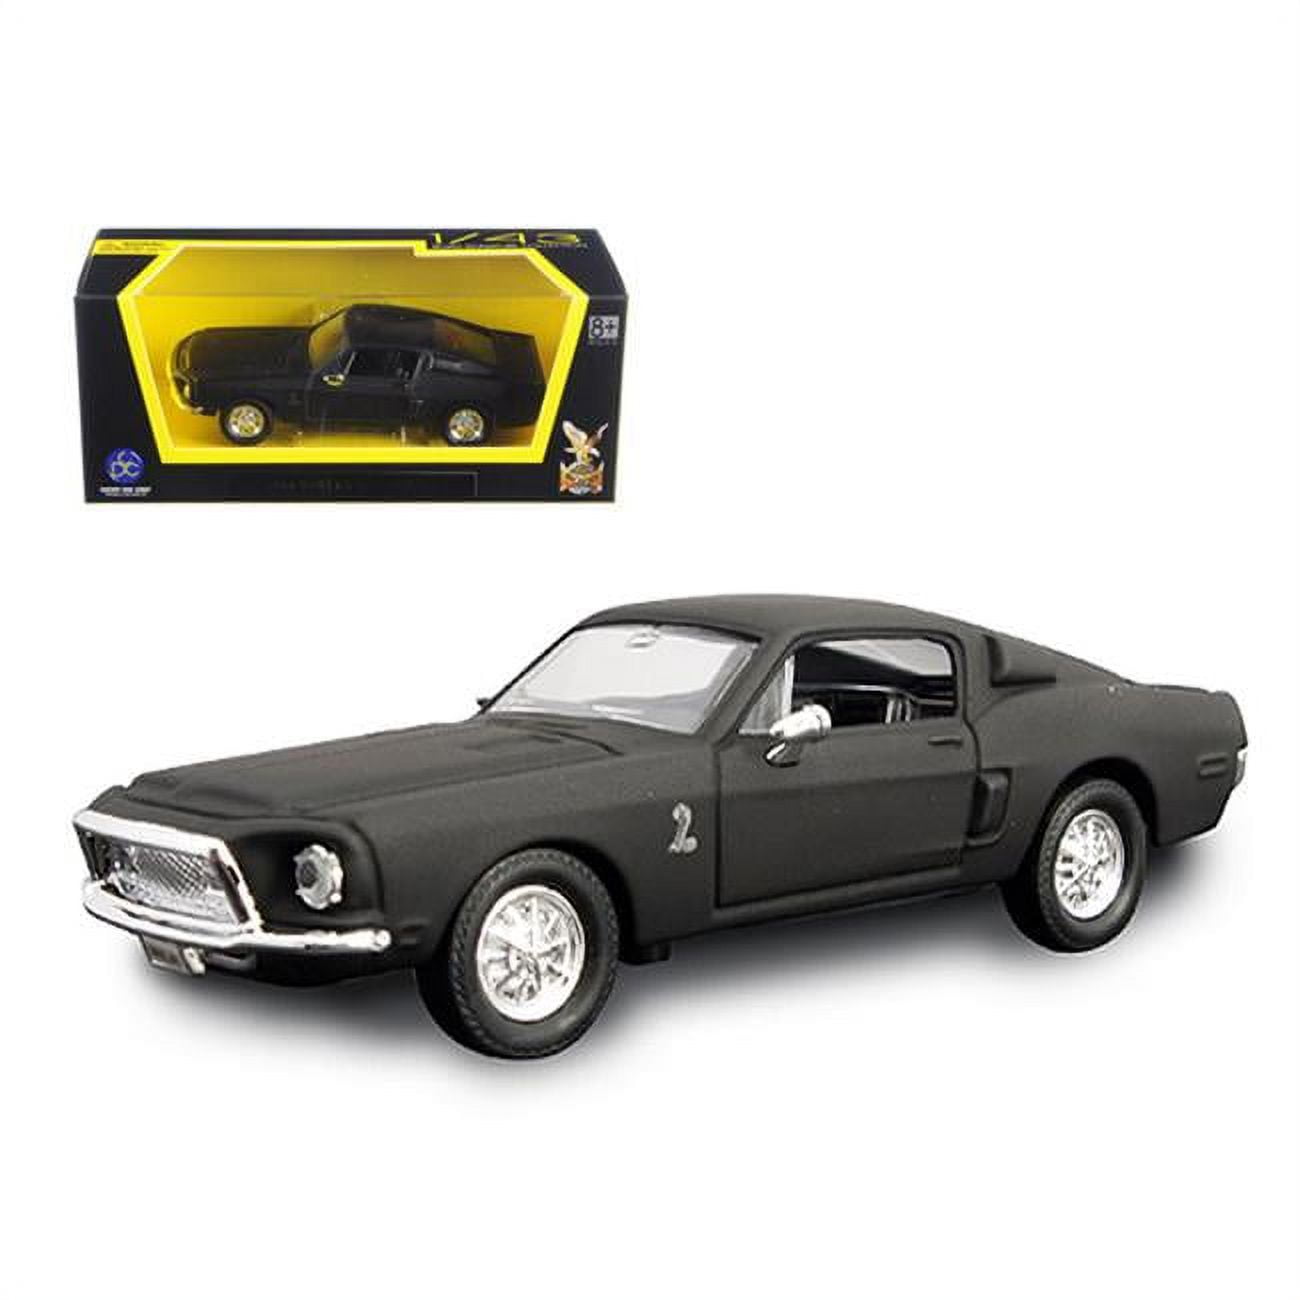 94214mbk 1 By 43 1968 Ford Shel By Mustang Gt 500 Kr Diecast Model Car, Matte Black